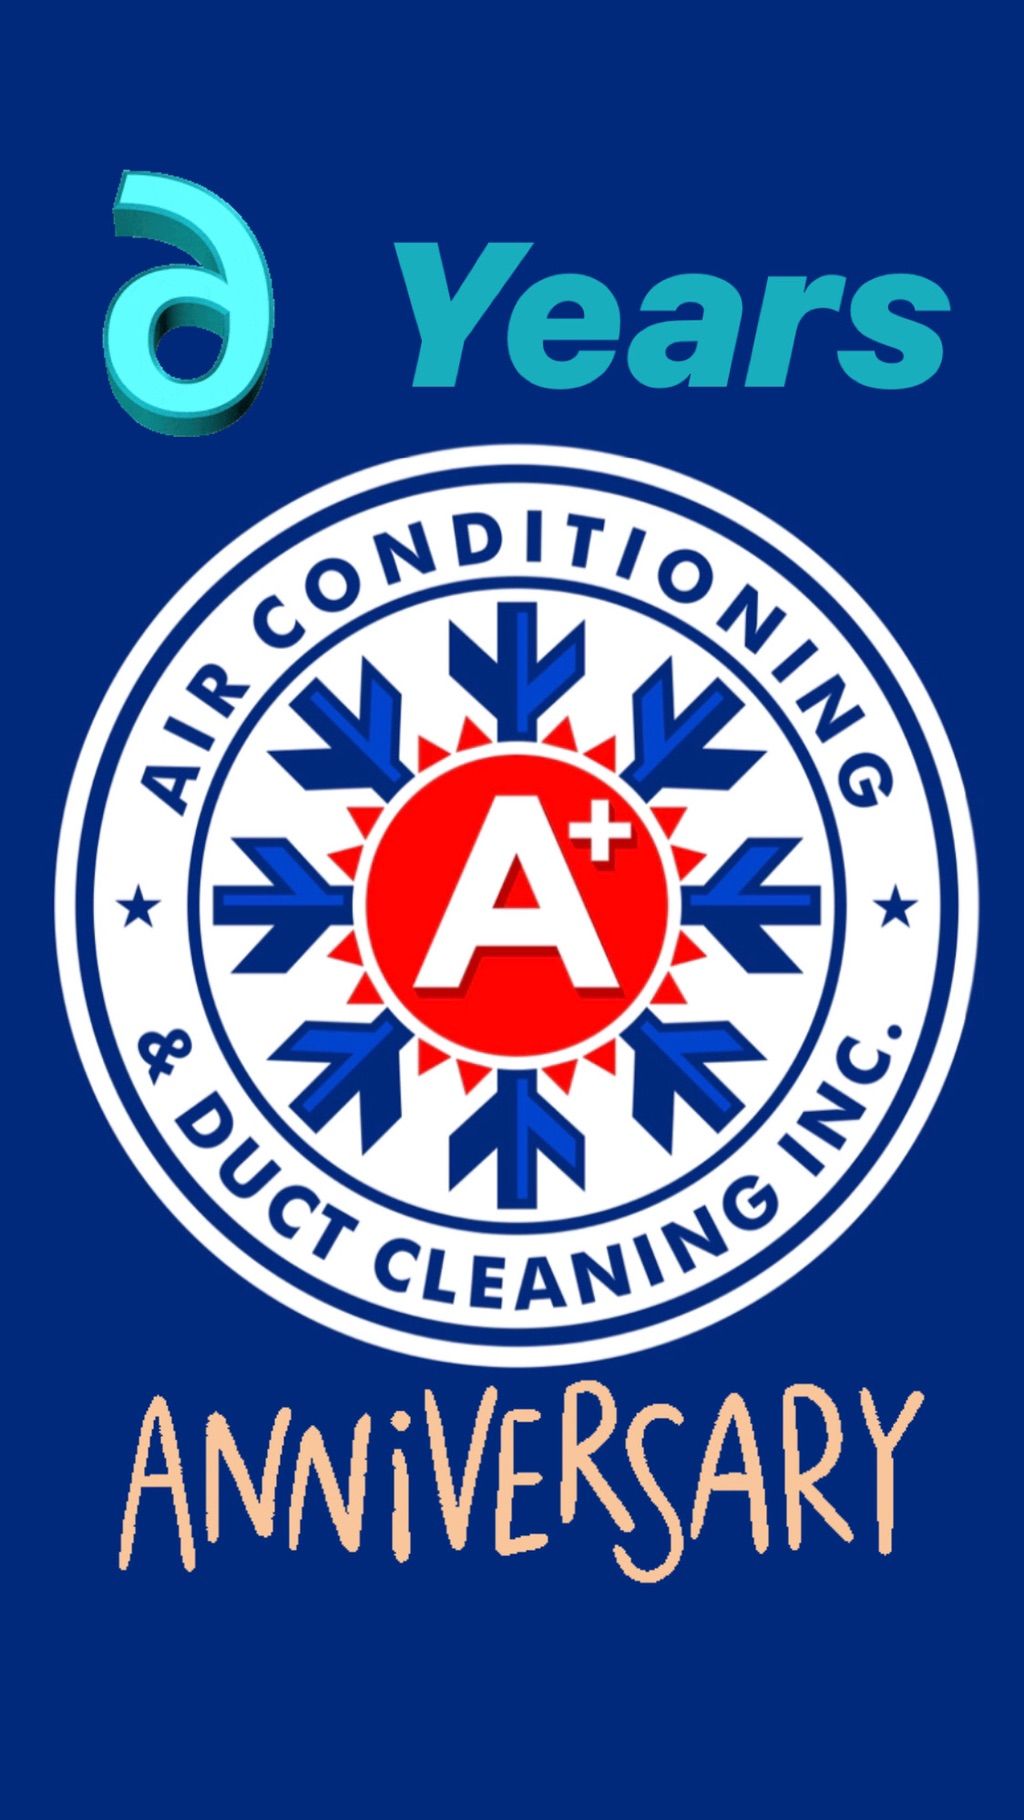 A+ Air Conditioning & Duct Cleaning inc.